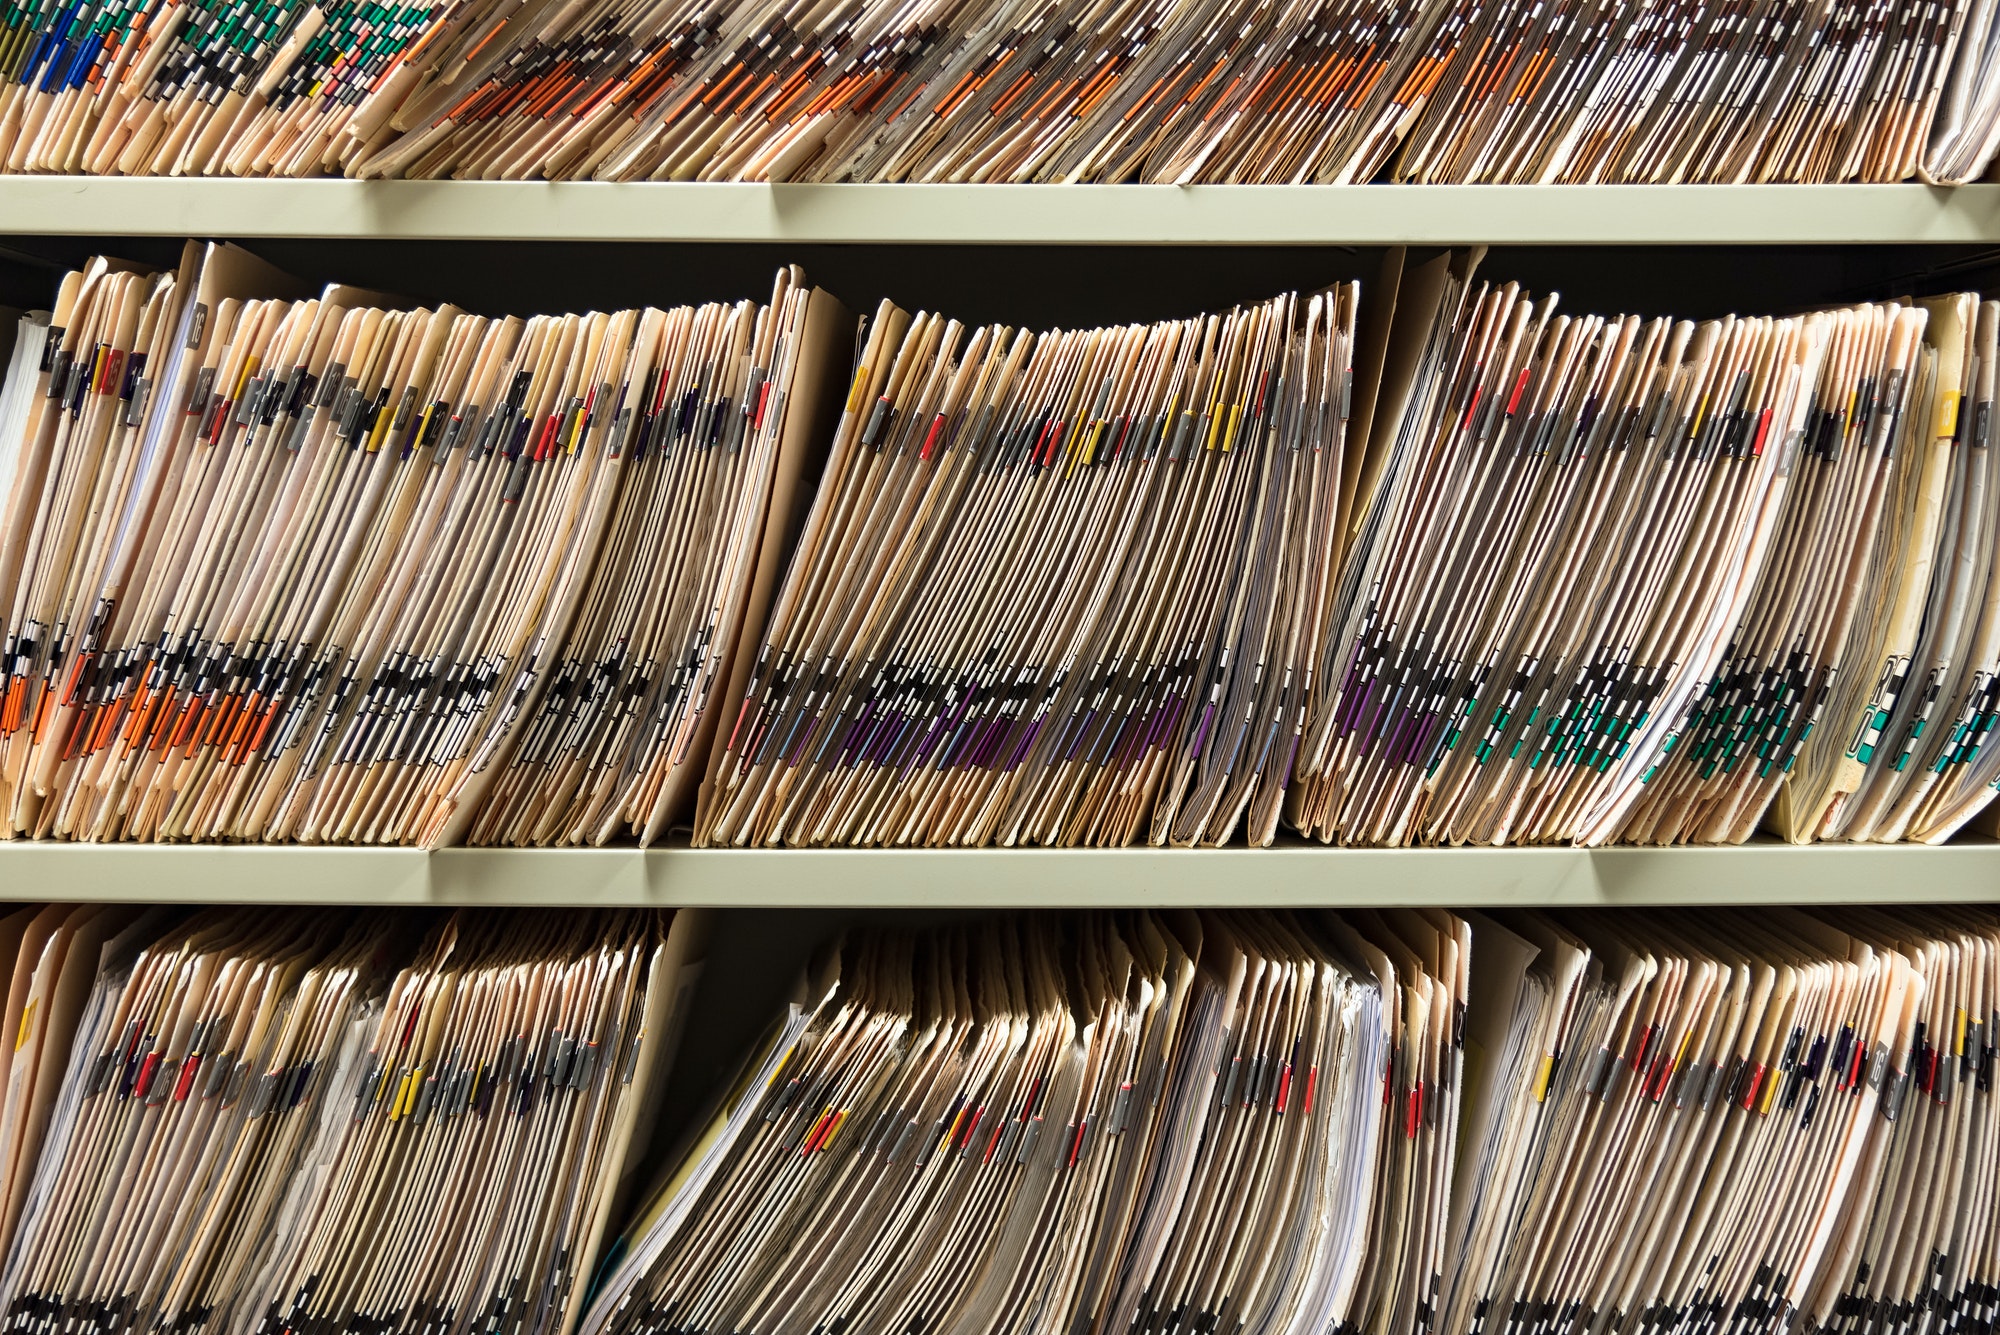 Medical records, medical charts, paper charts in a stack